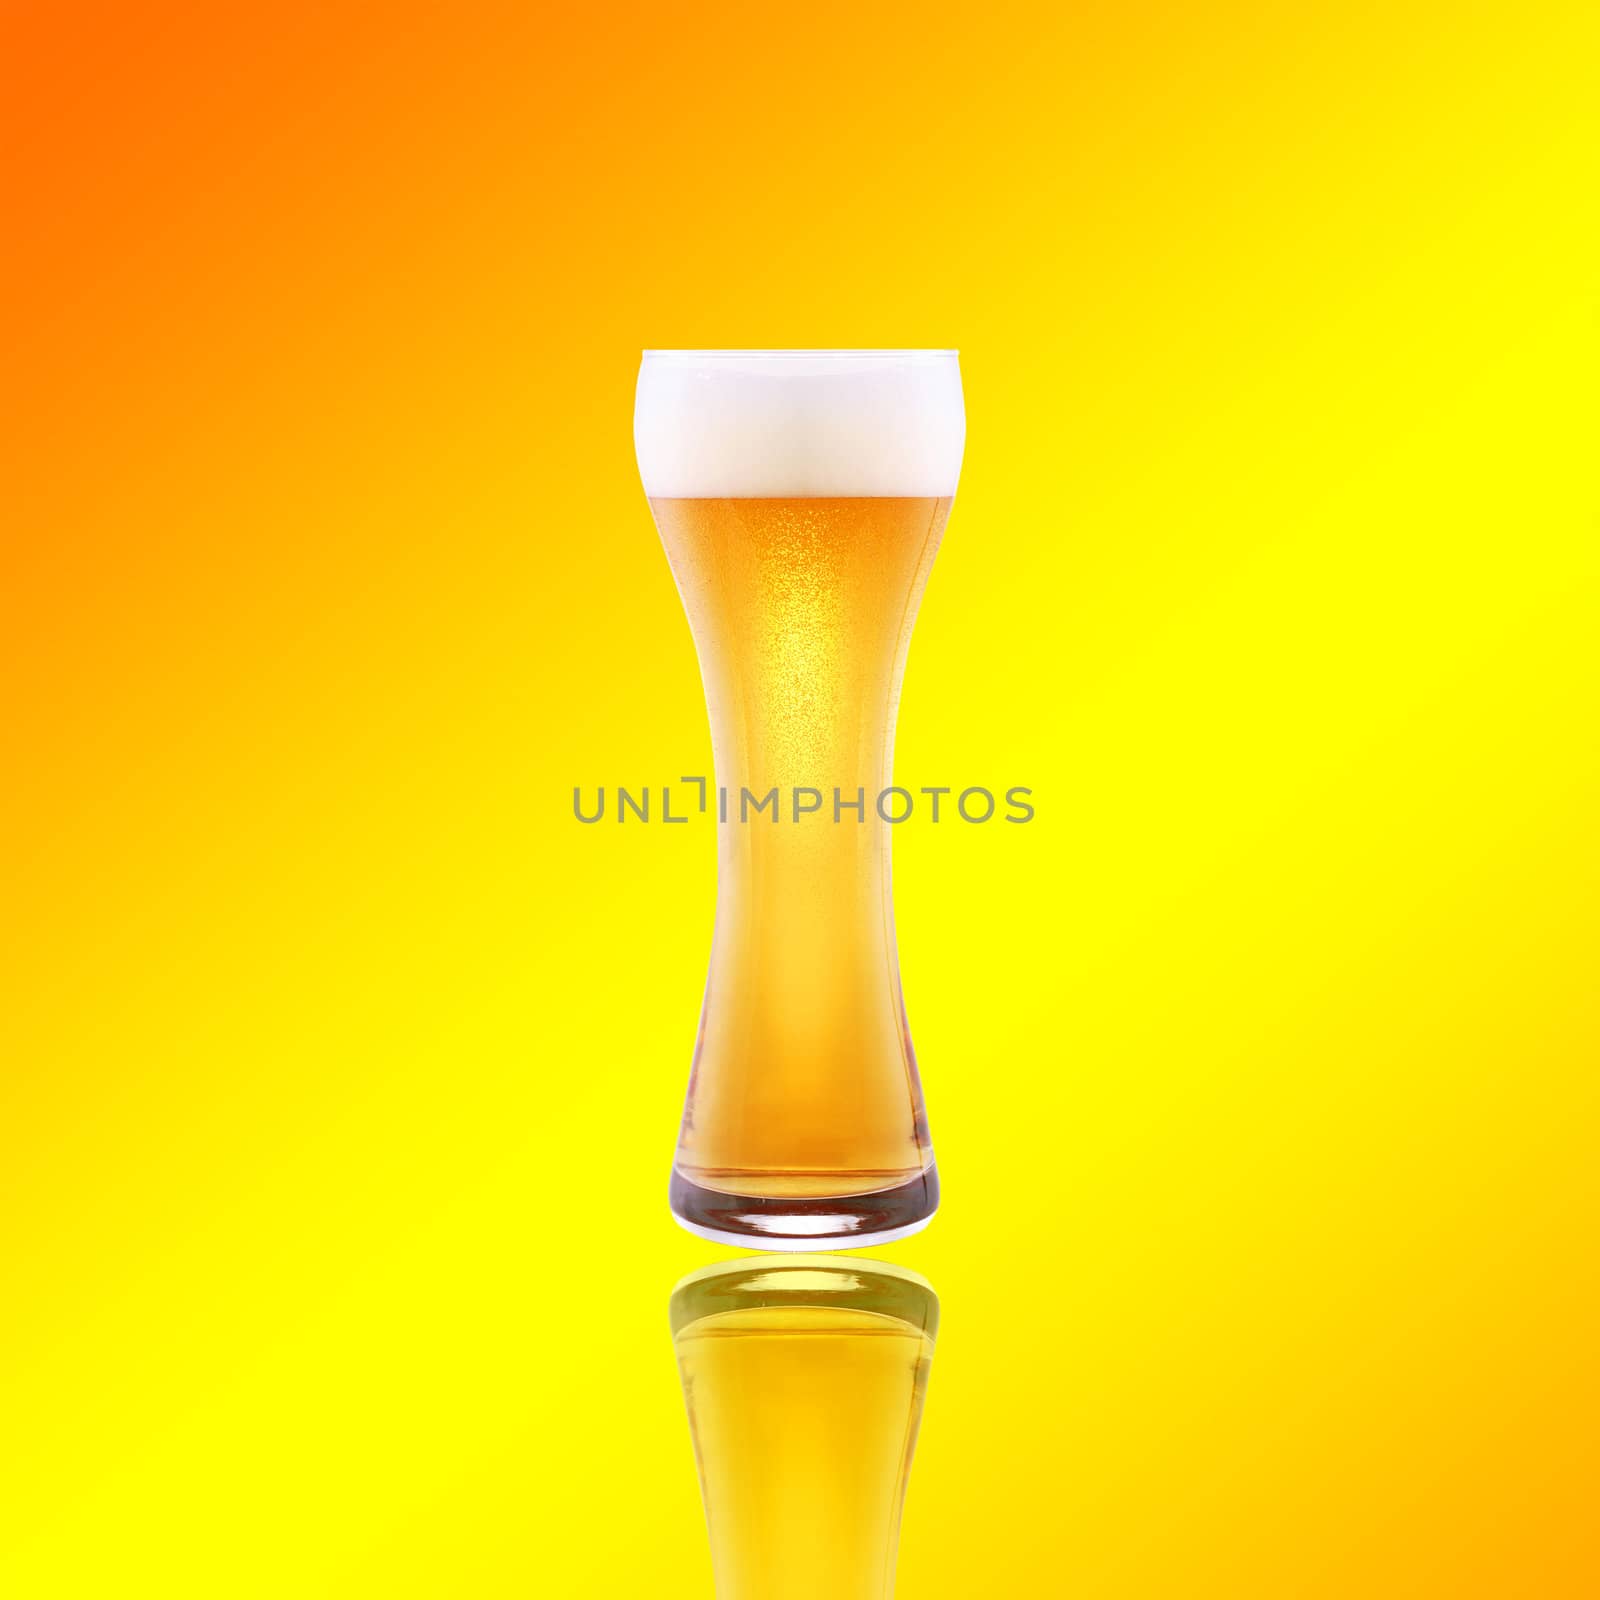 Beer glass with froth over yellow background